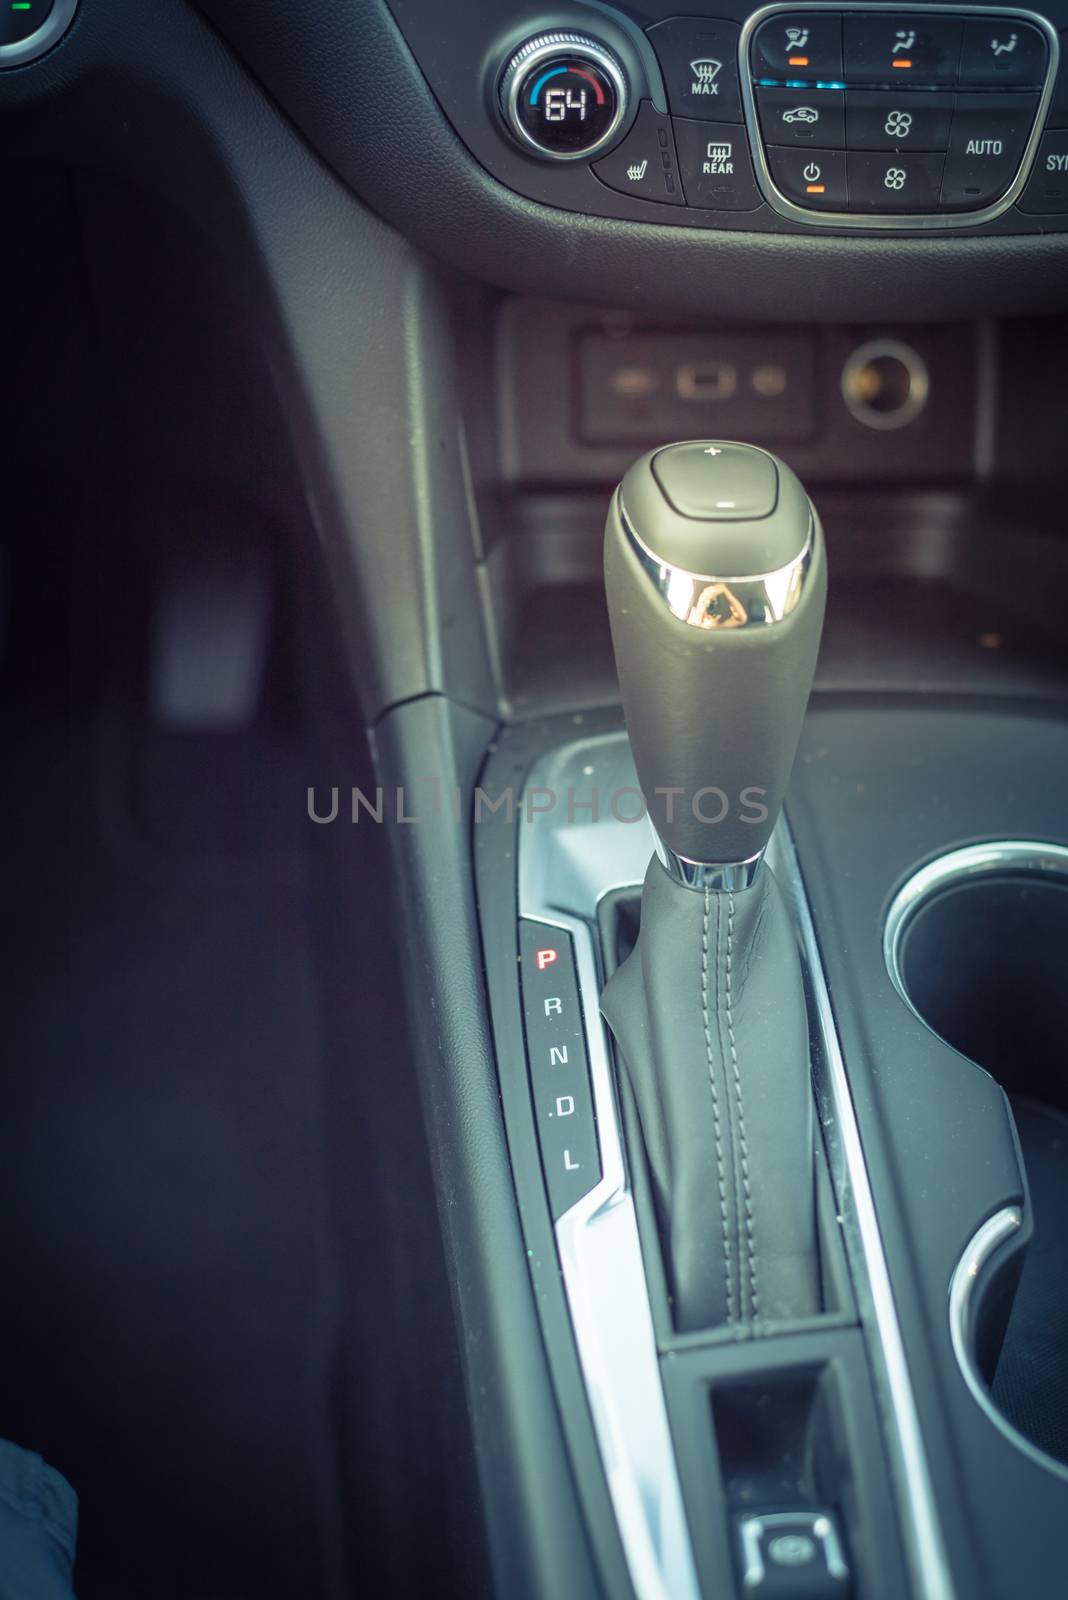 Automatic transmission in P mode inside modern car by trongnguyen